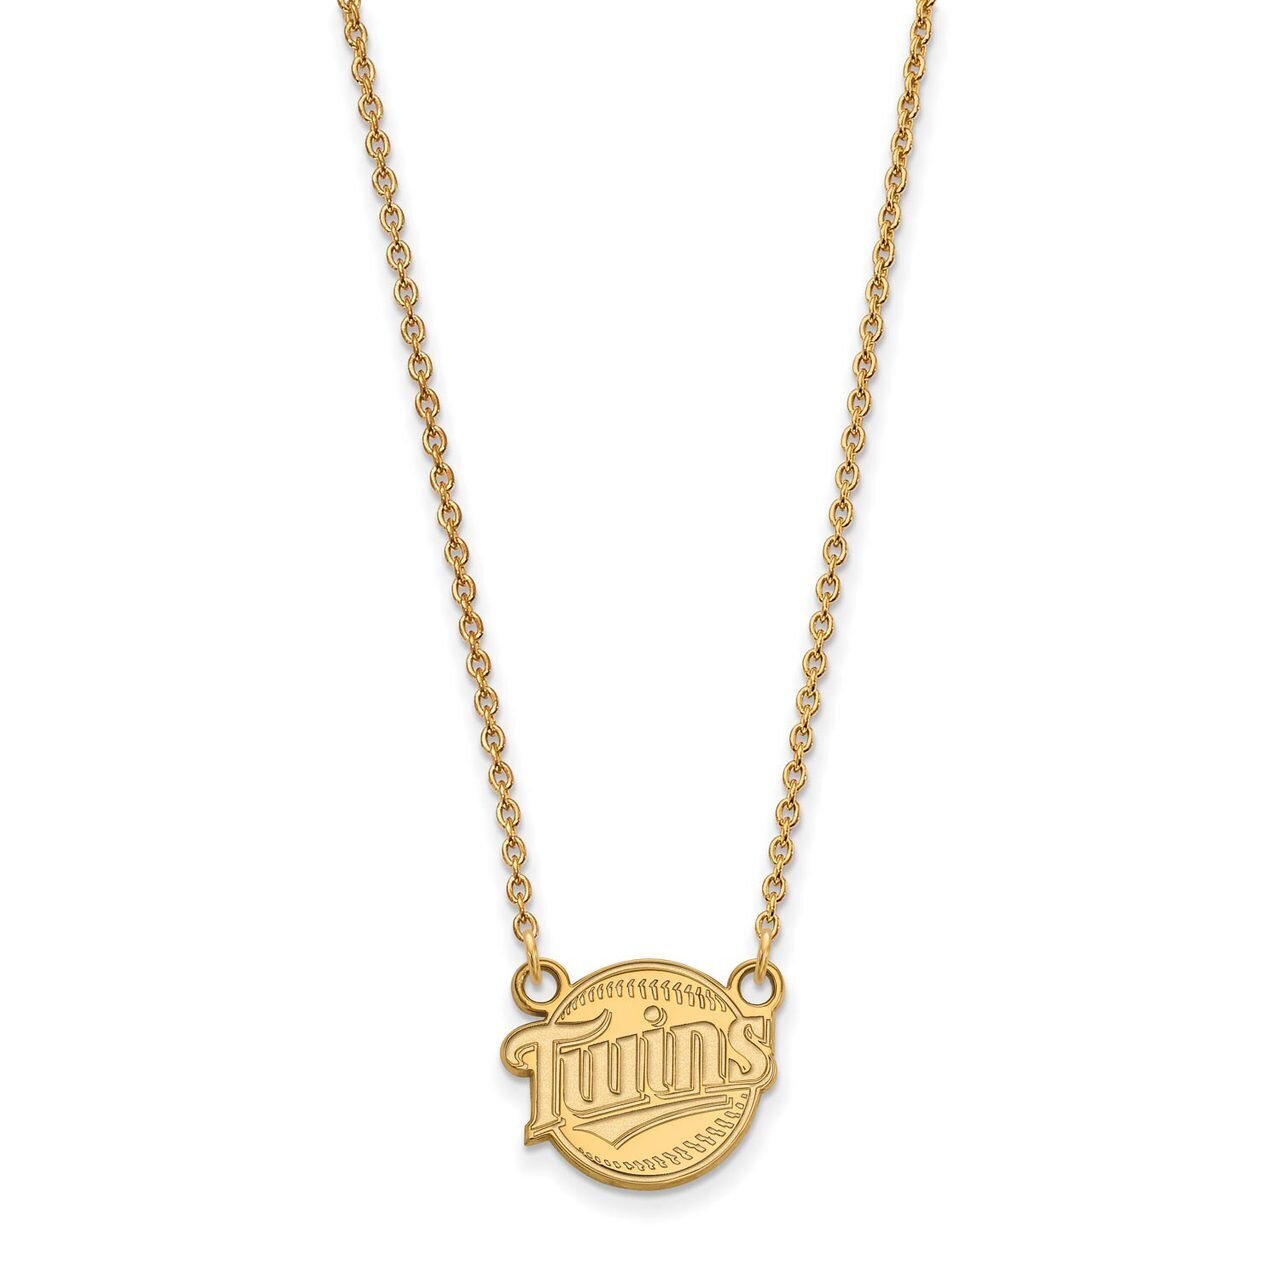 Minnesota Twins Small Pendant with Chain Necklace 10k Yellow Gold 1Y022TWN-18